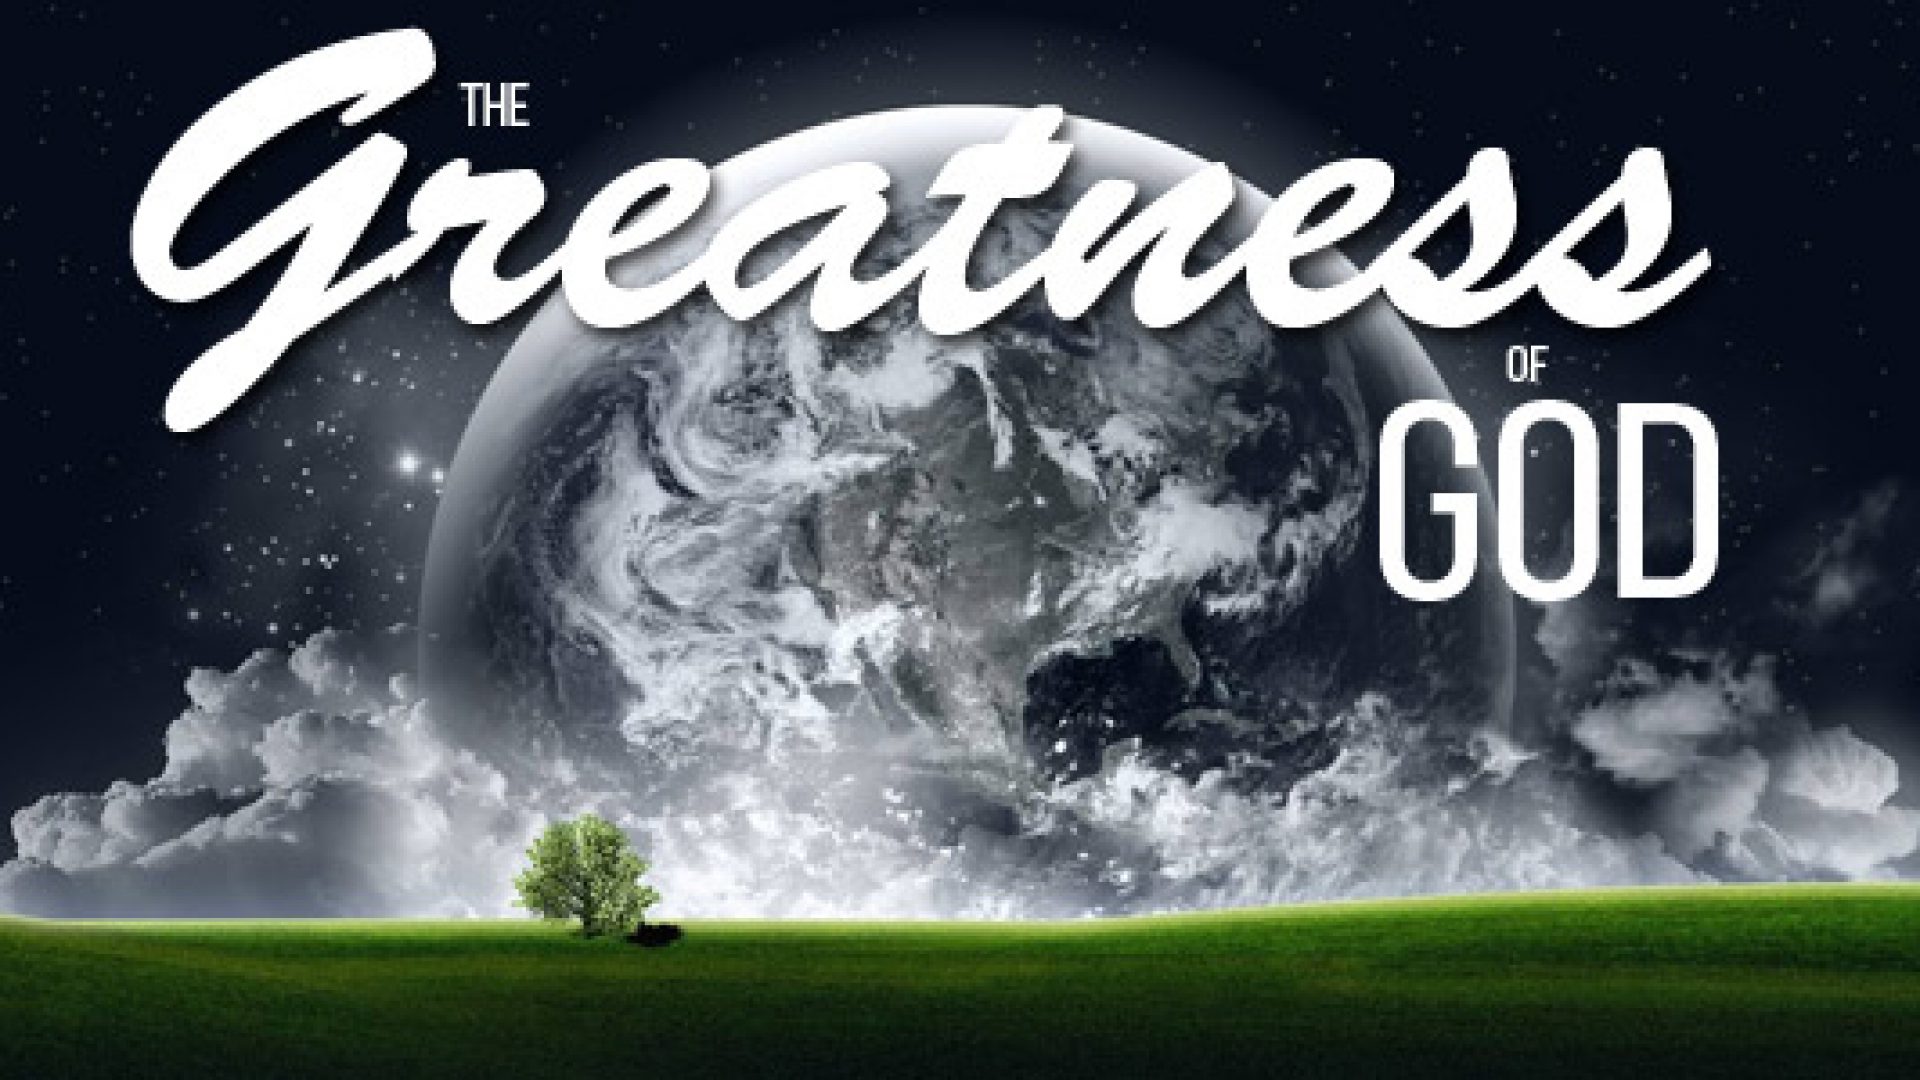 THE GREATNESS OF GOD